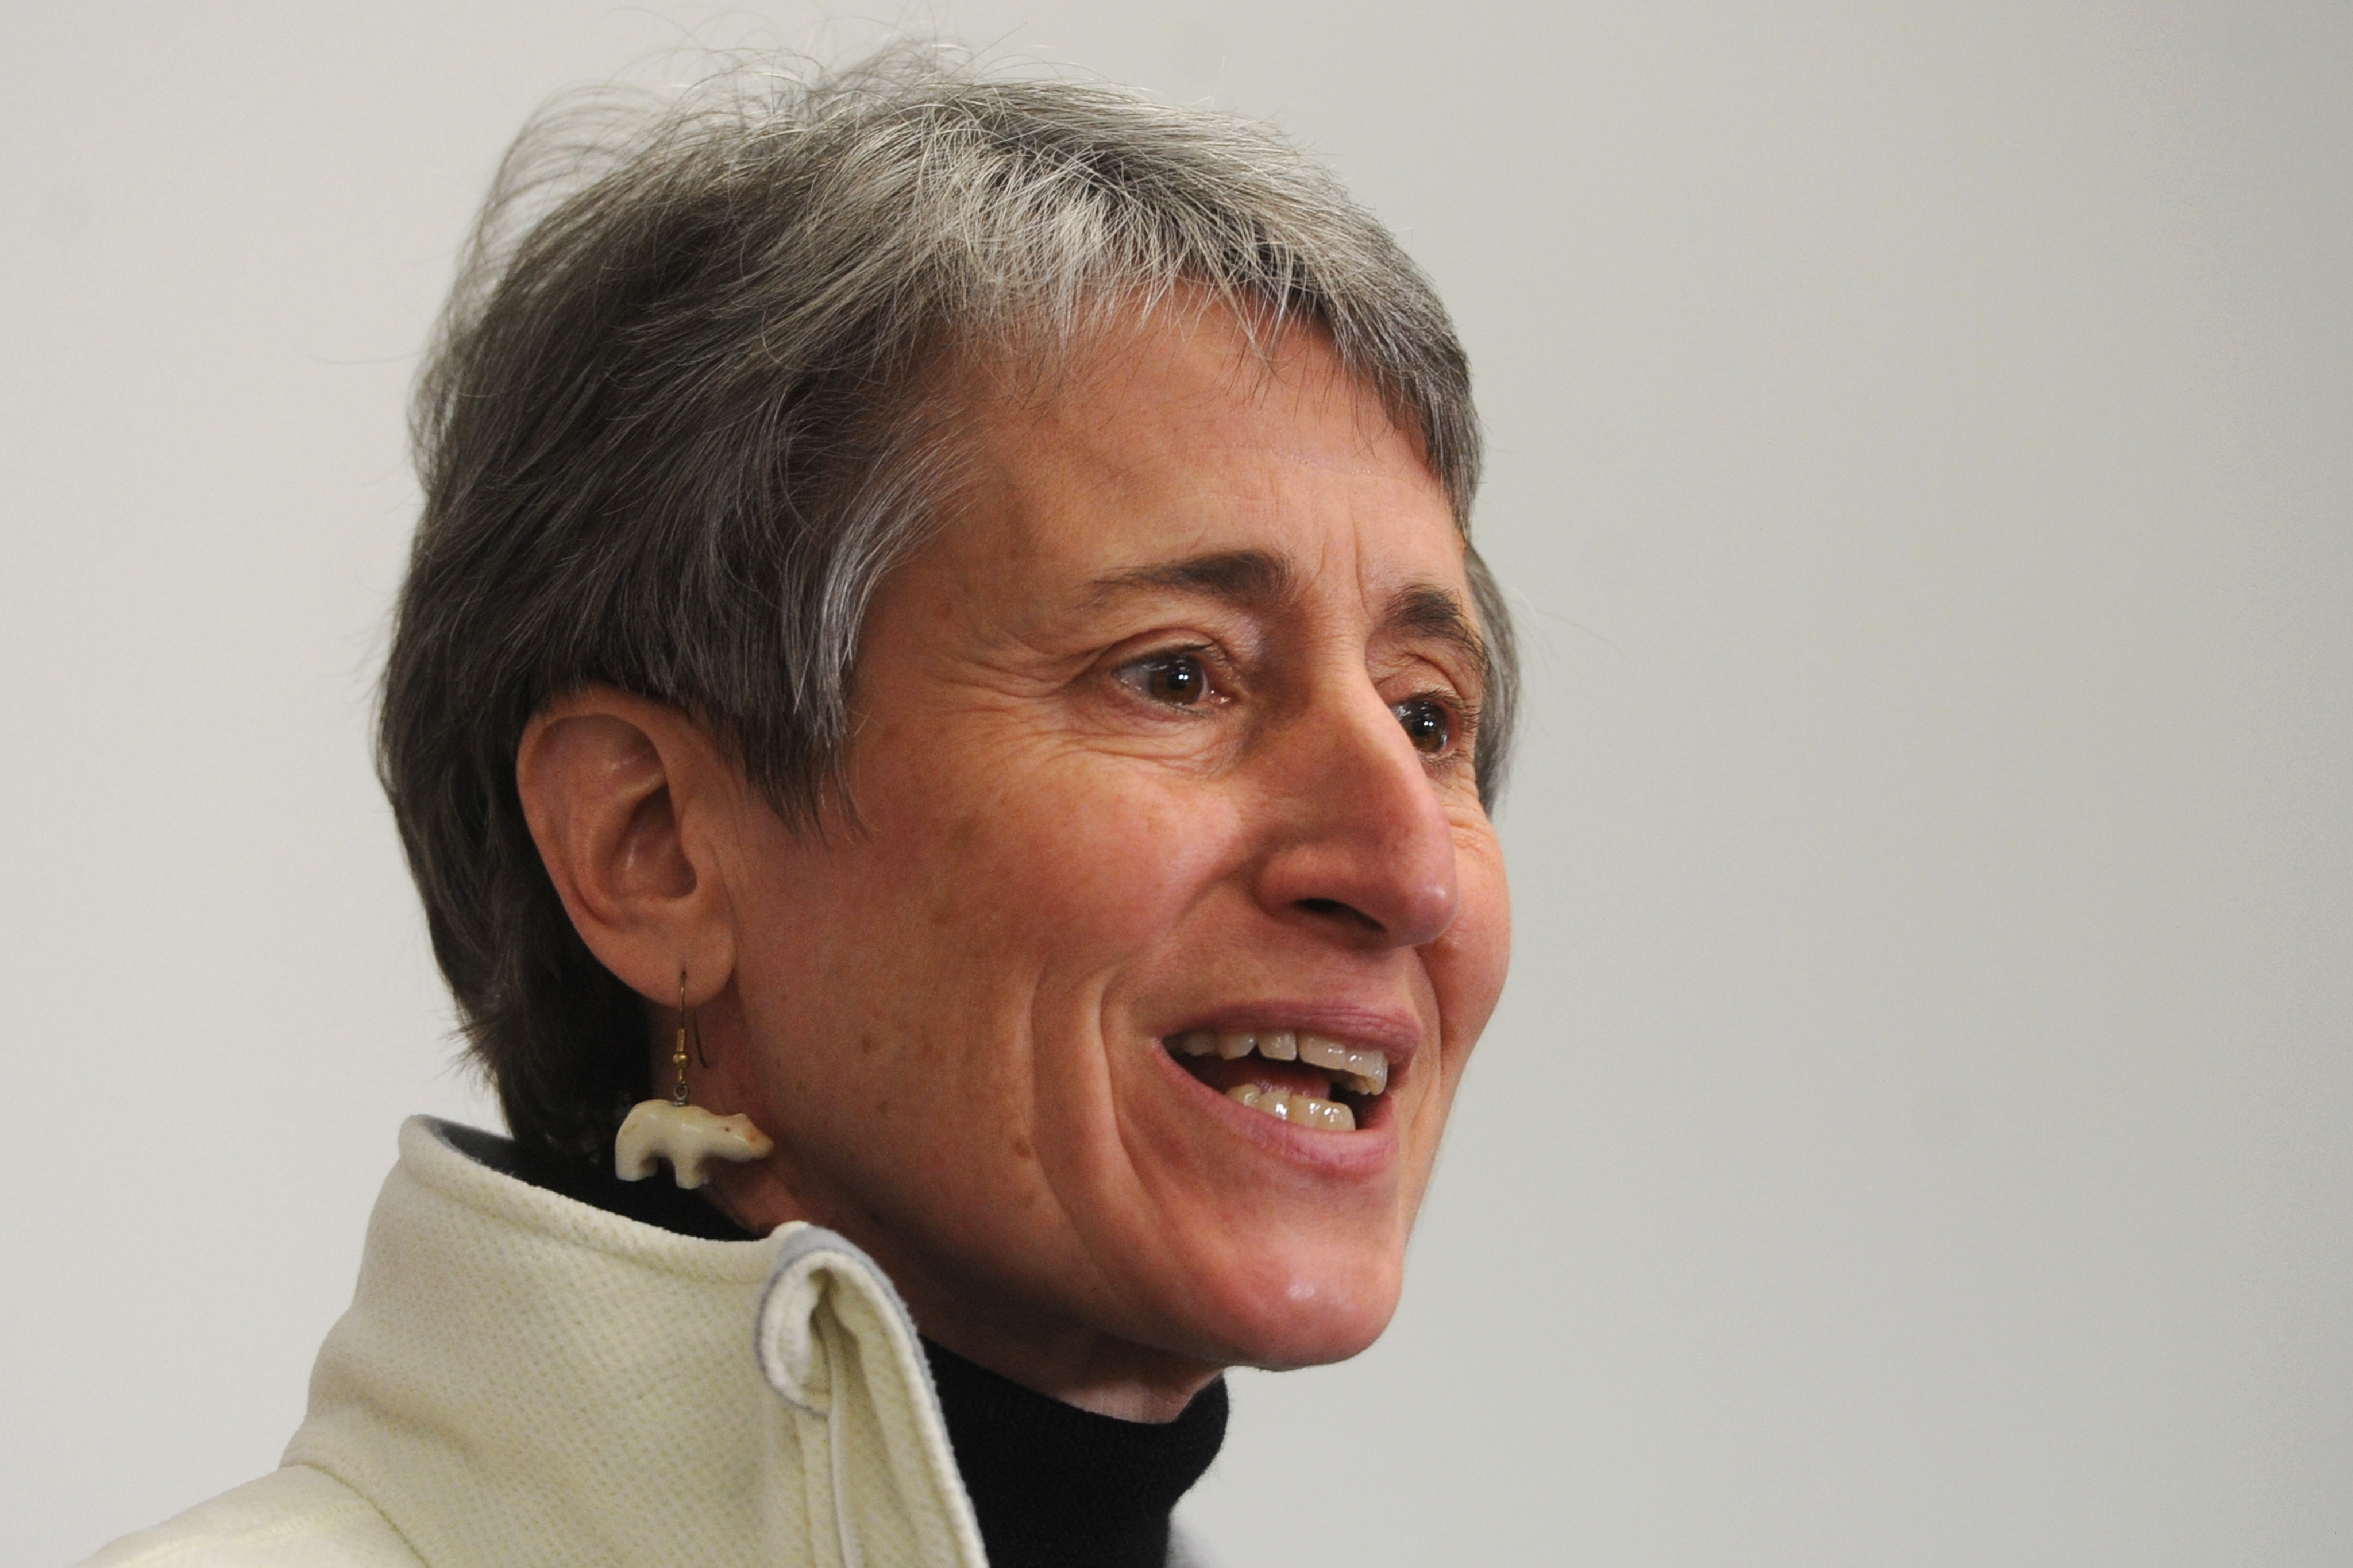 Interior Secretary Sally Jewell held a press conference in Anchorage on Tuesday, Feb. 17, 2015, to discuss her visit to Alaska. (Bill Roth / Alaska Dispatch News)